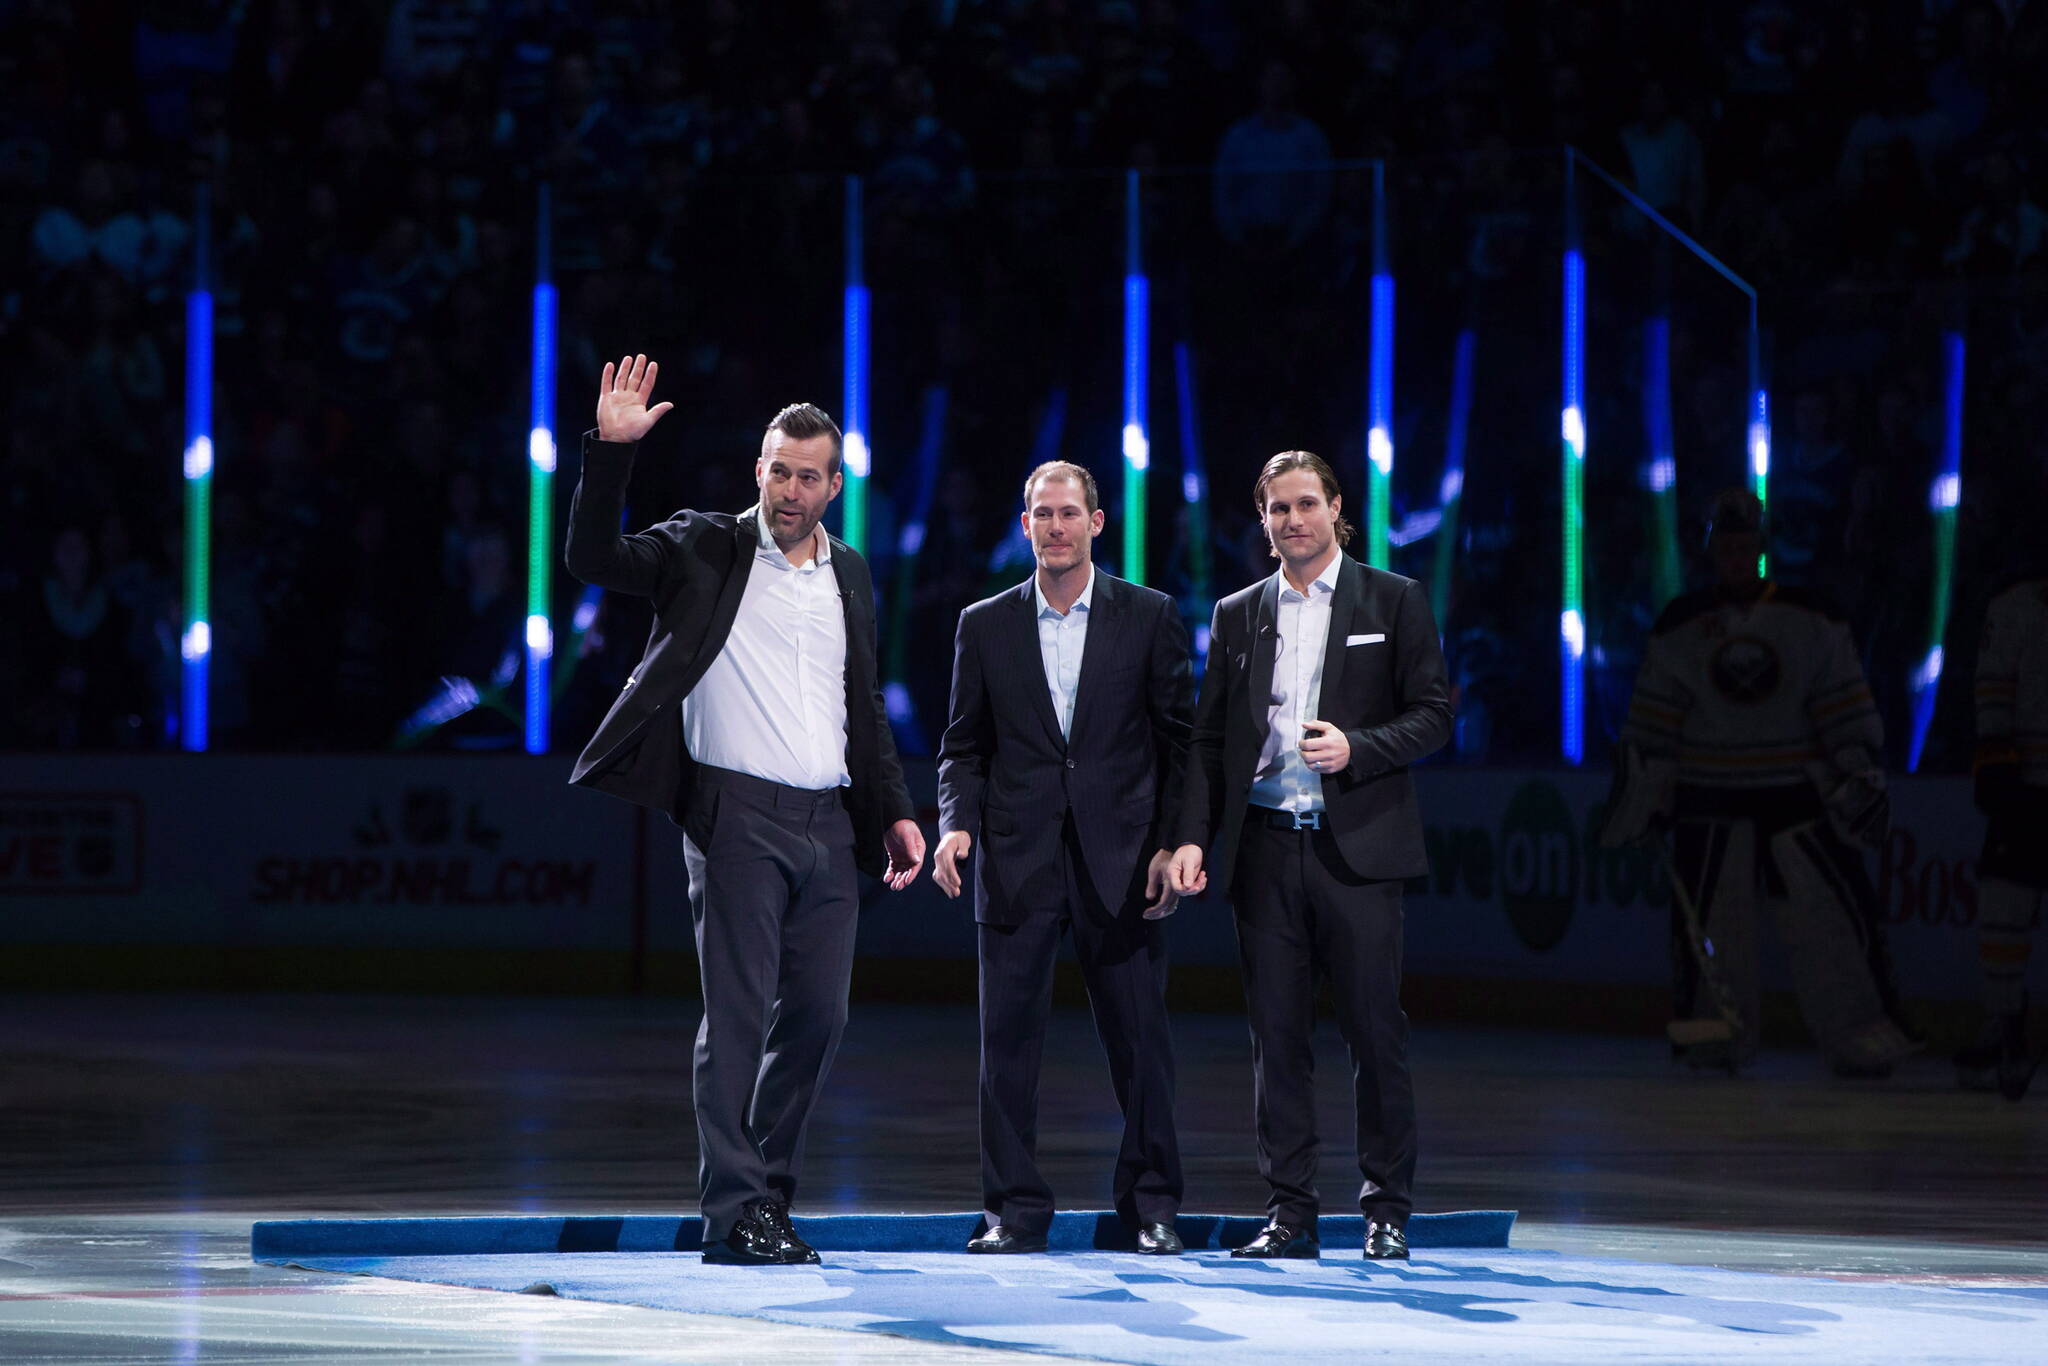 Former Vancouver Canucks linemates Todd Bertuzzi, from left, Brendan Morrison and Markus Naslund, of Sweden, are honoured during a ceremony before the Vancouver Canucks and Buffalo Sabres play an NHL hockey game in Vancouver, B.C., on Monday December 7, 2015. THE CANADIAN PRESS/Darryl Dyck